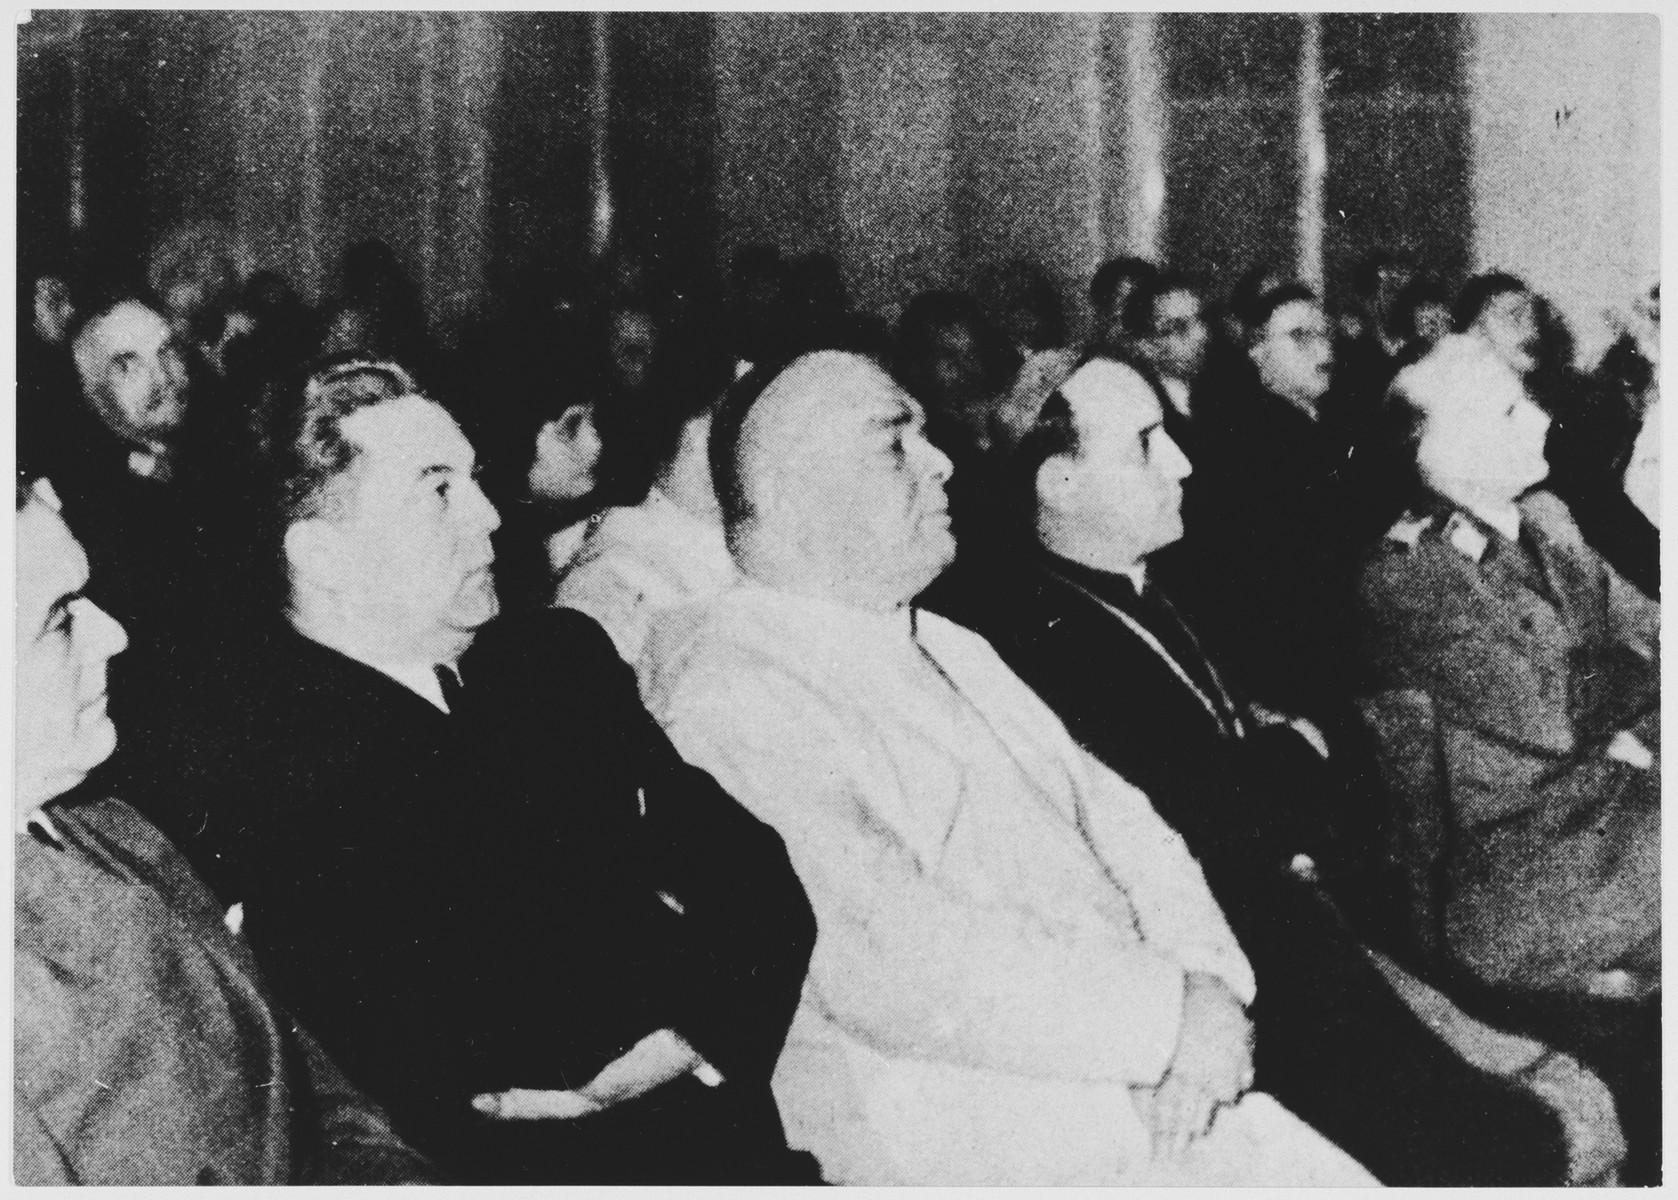 Croatian political and religious leaders sit in the audience at an unidentified ceremonial gathering.

Pictured in the front row from left to right are: Minister of the Interior Andrija Artukovic (second from the left in the dark suit), Papal legate Giuseppe Ramiro Marcone, and Archbishop Alojzije Stepinac.